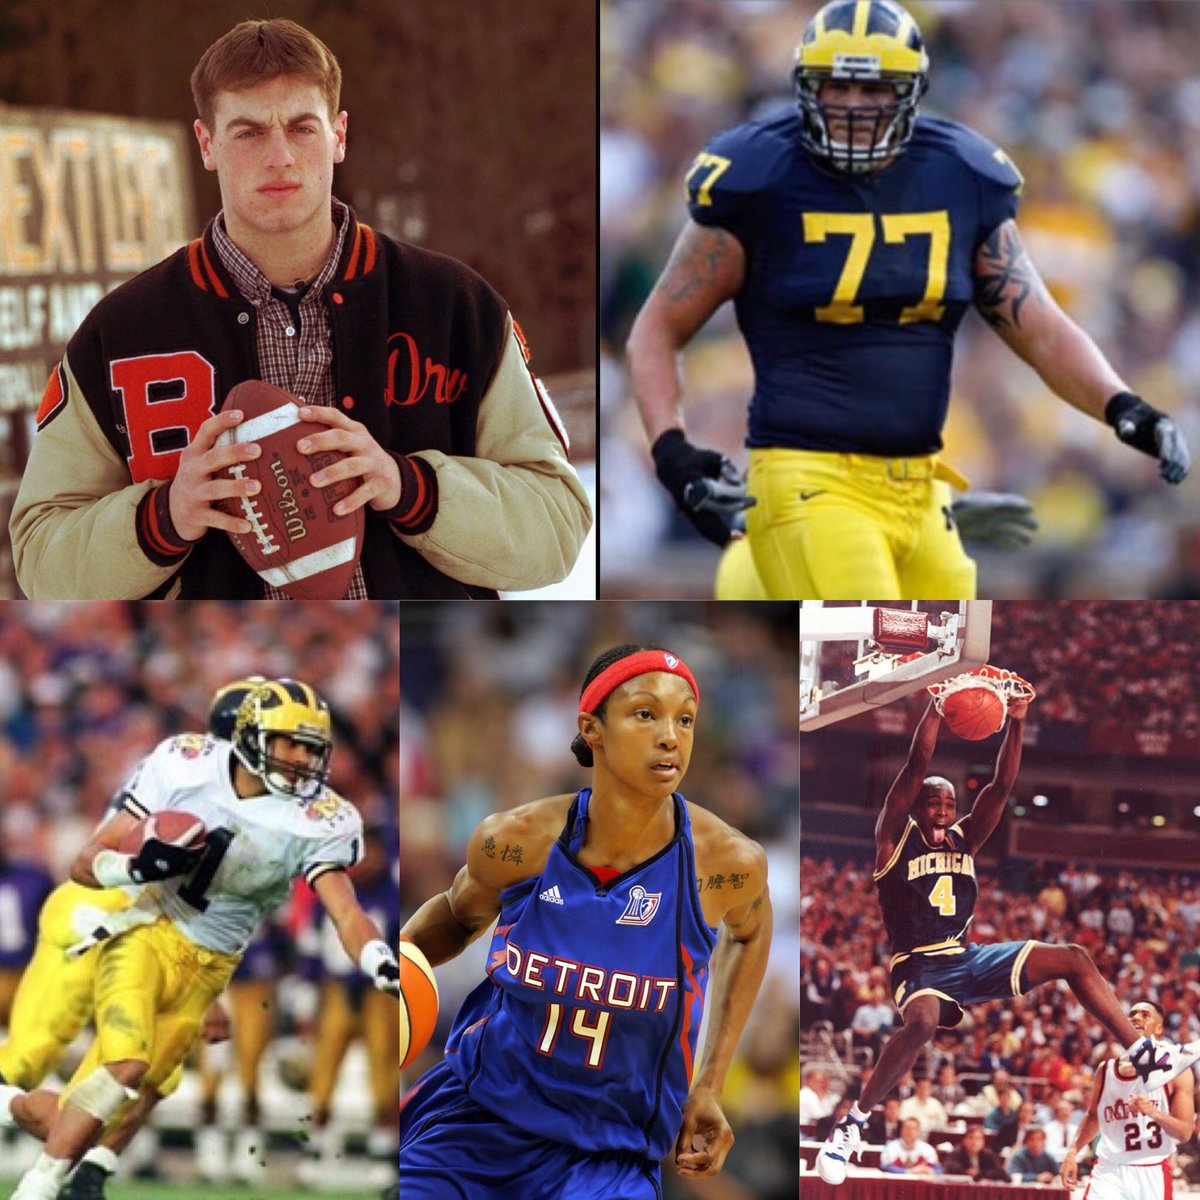 The Michigan Sports Hall of Fame 2020 Ballot is now open for Public Vote. Visit  http://MSHOF.org/ballot/  to cast your vote on the 10 Finalists in the Amateur Category, now through April 30.